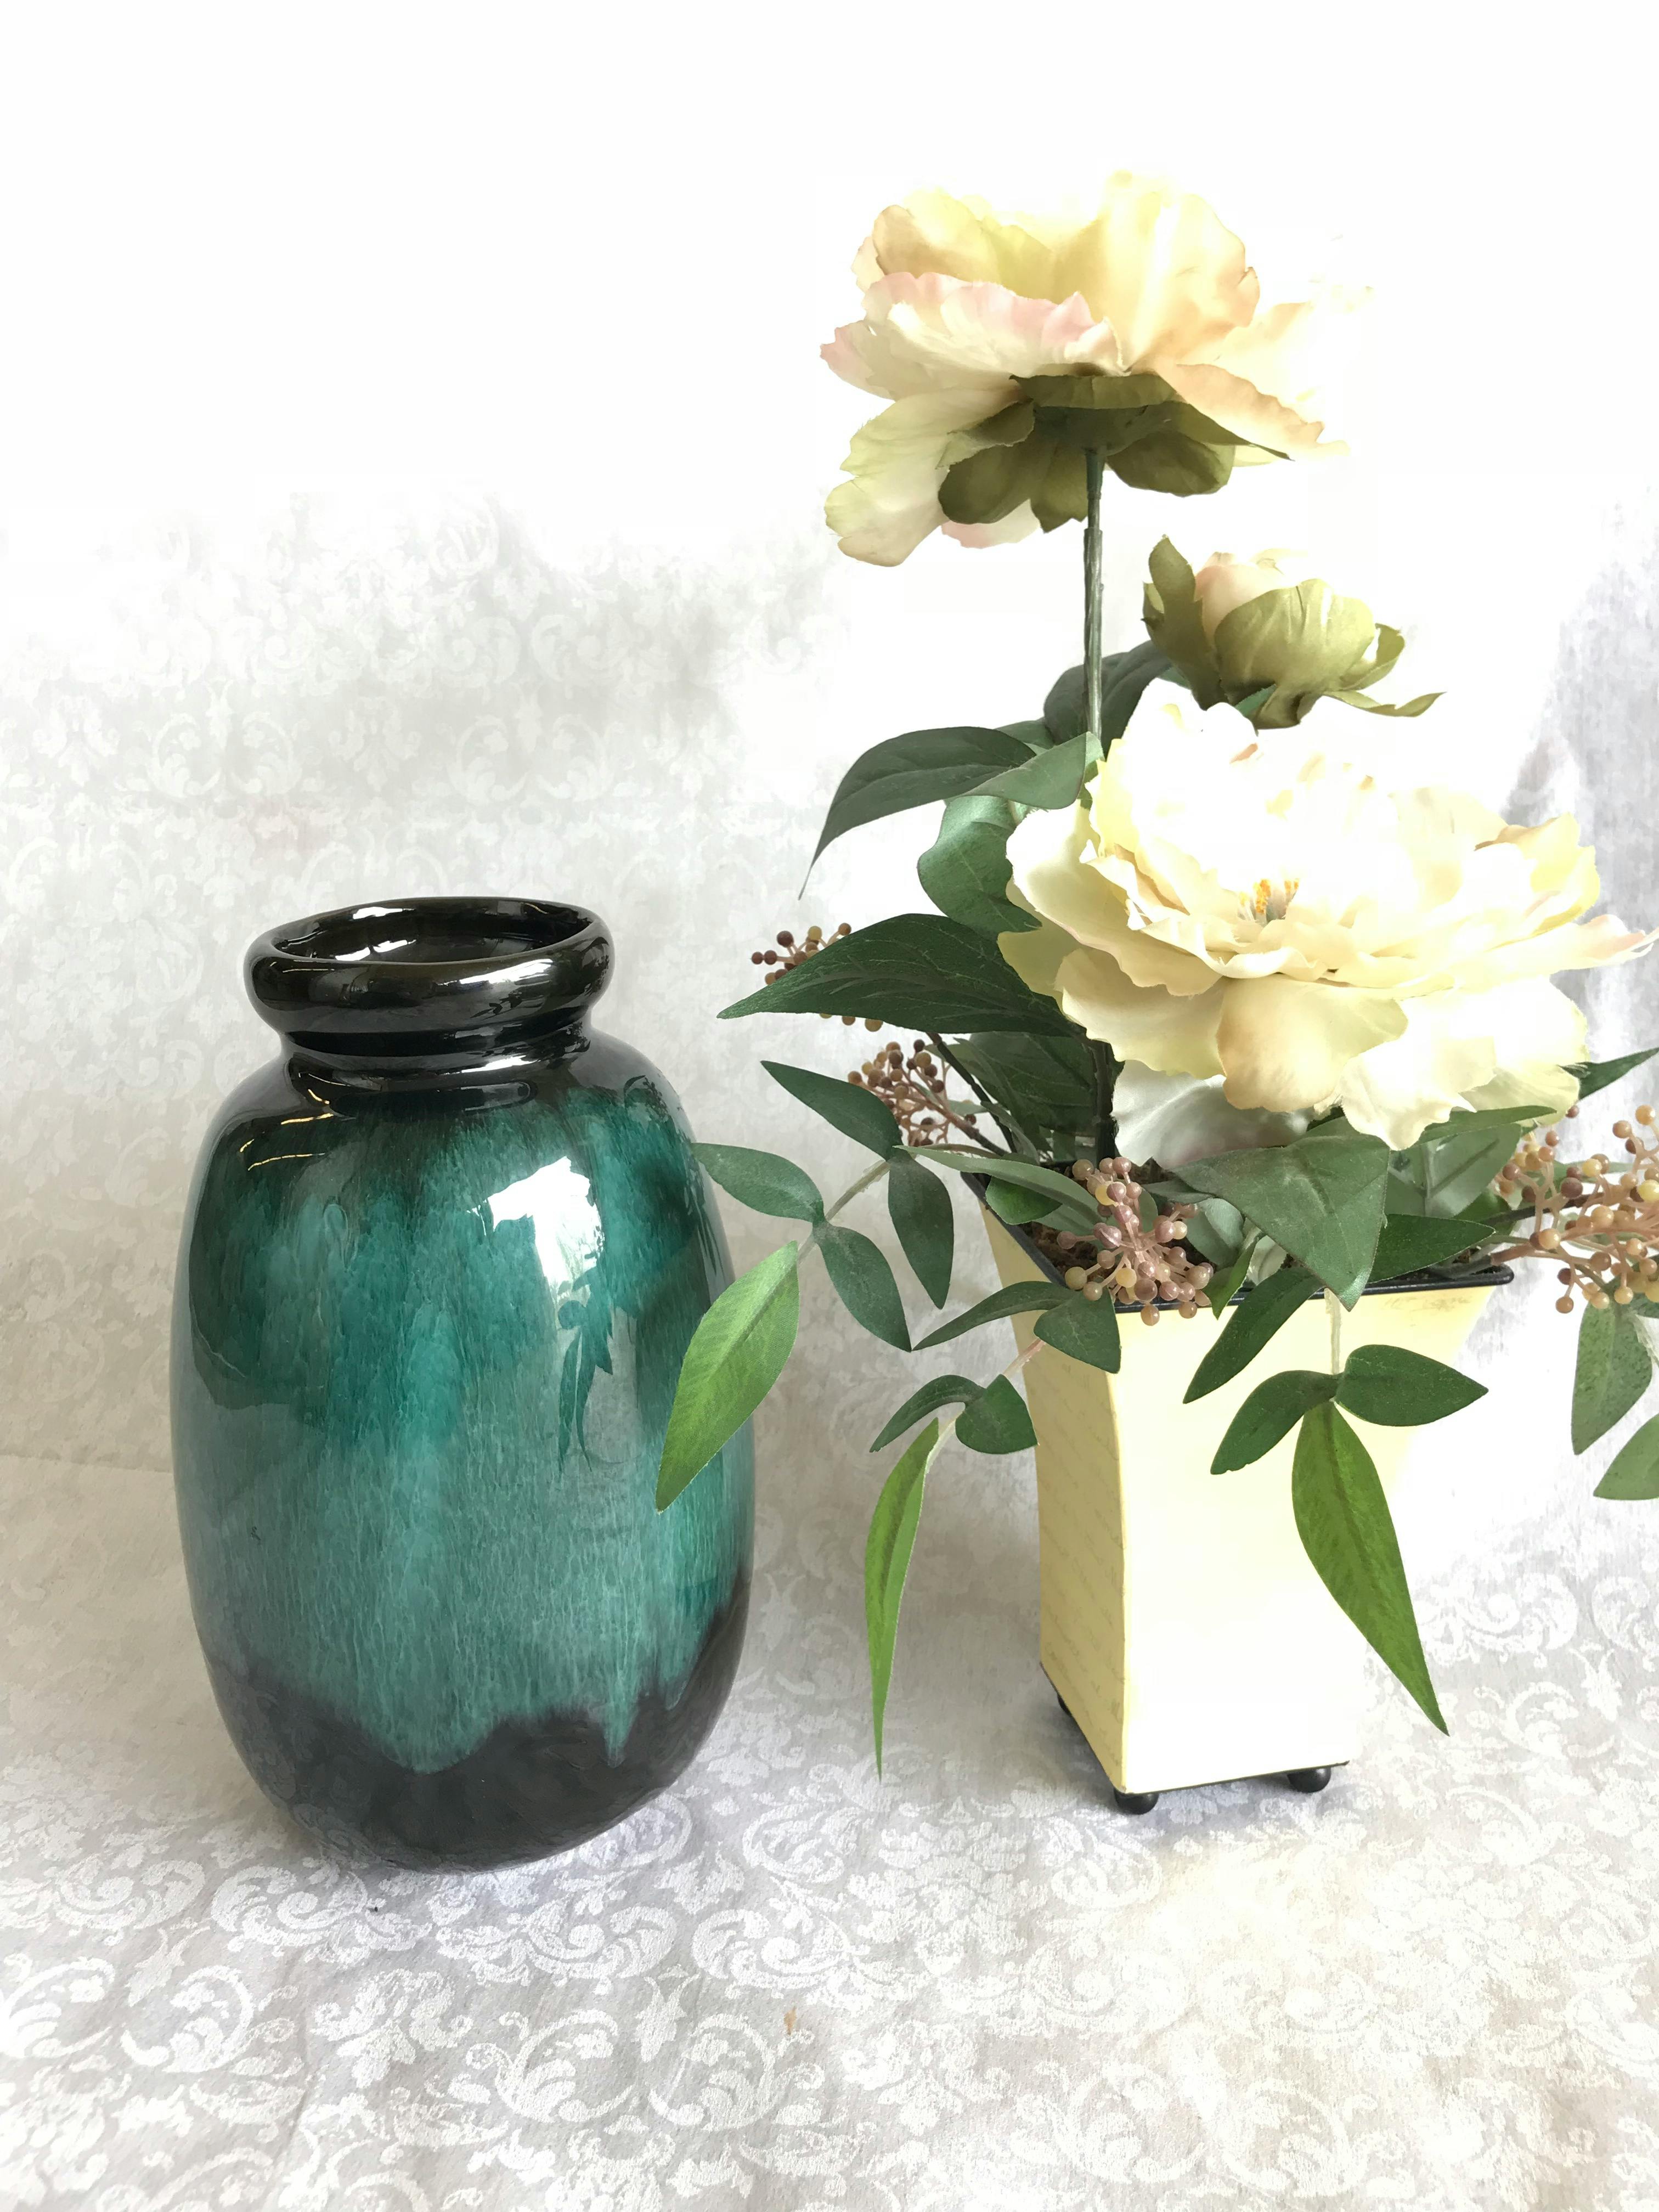 Free stock photo of artificial flowers, flower vase, turquoise